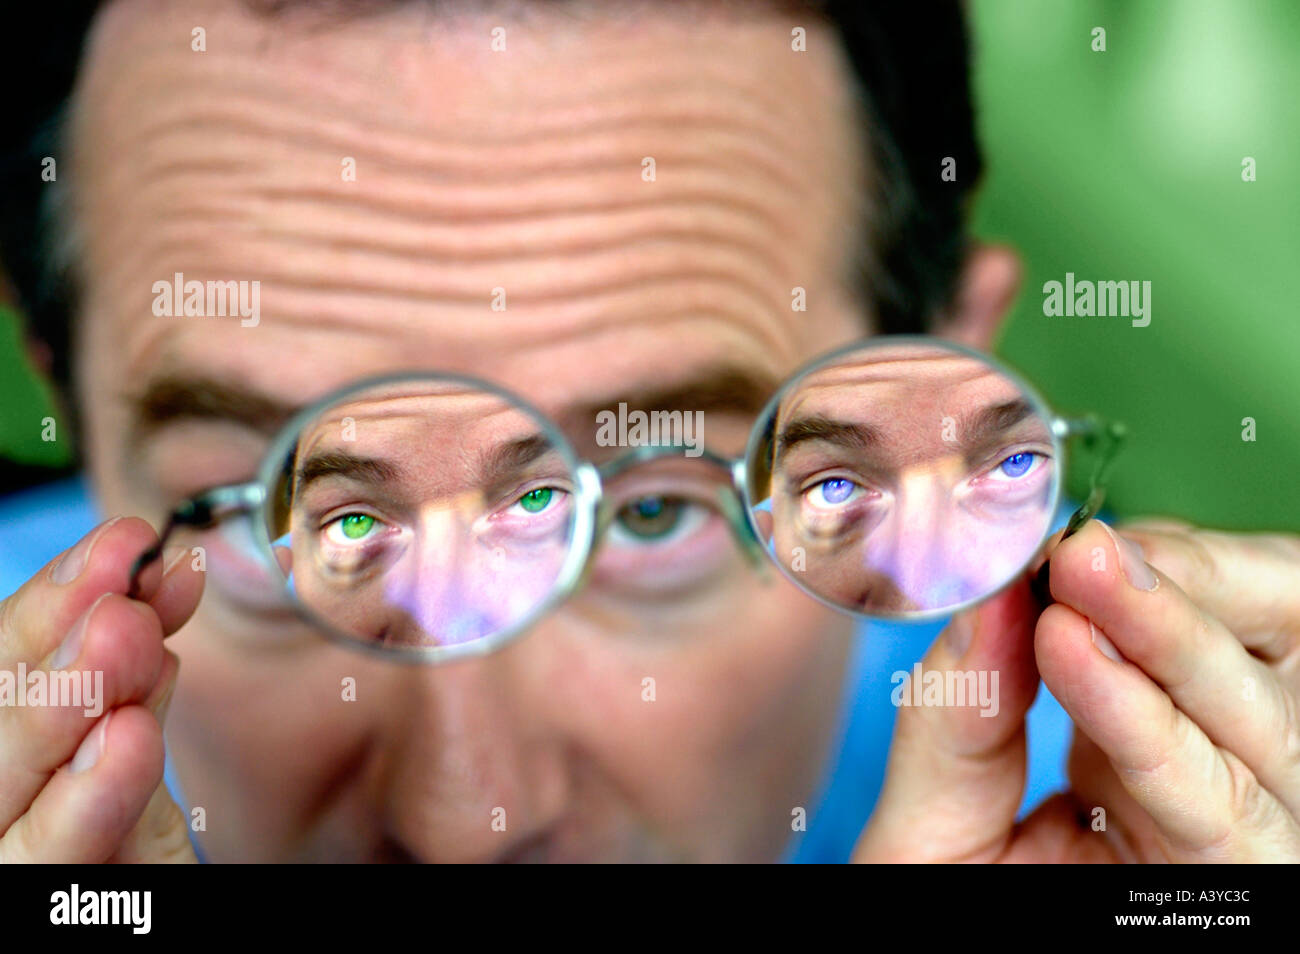 MR Man looking through his glasses with blue and green eyes Stock Photo